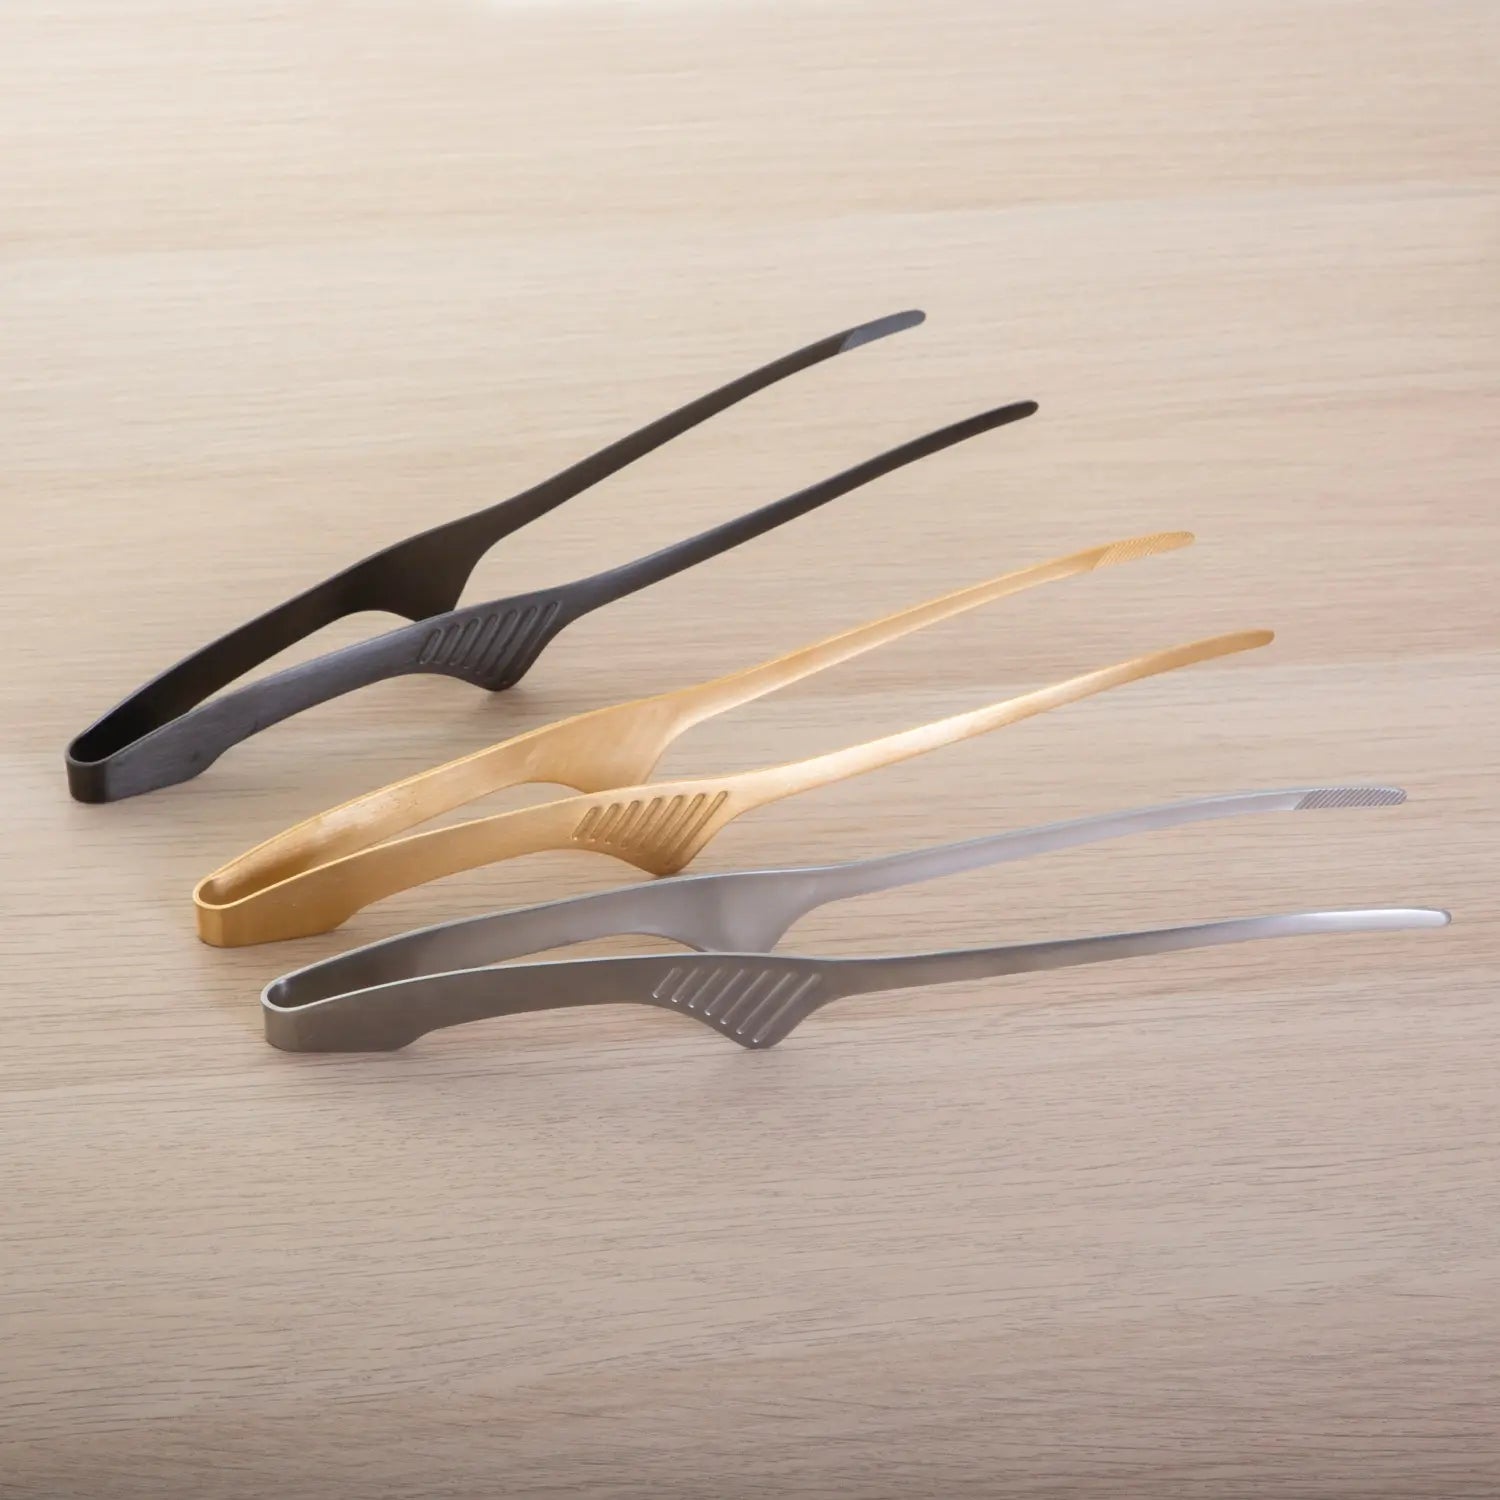 What Are Tongs, And What Are They Used For? – Dalstrong